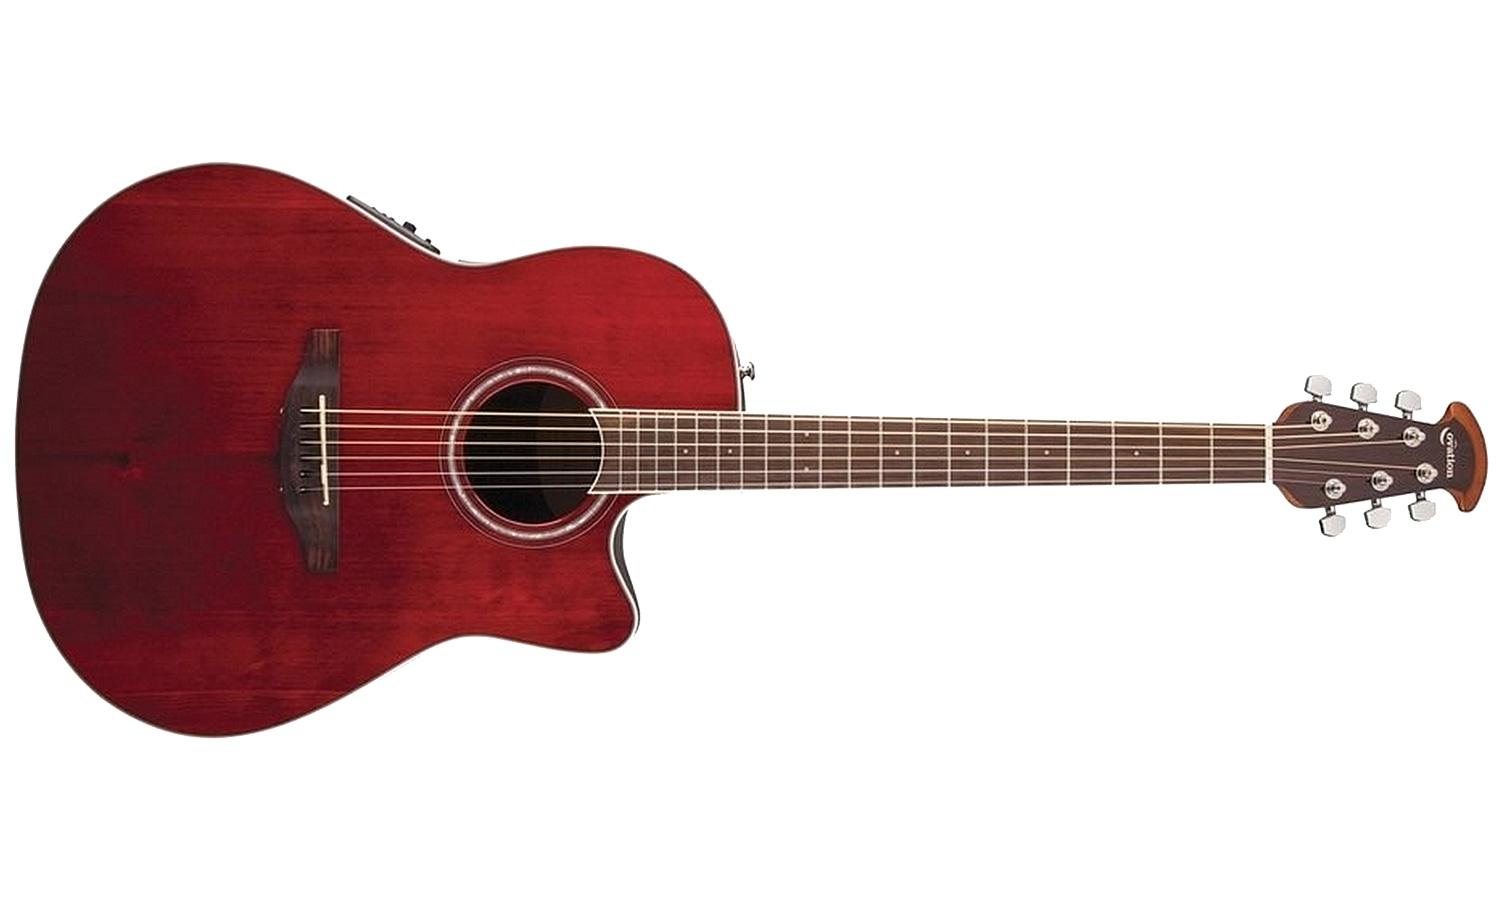 Ovation Cs24-rr Celebrity Standard Mid Depth Cw Epicea Lyrachord Rw - Ruby Red - Guitare Electro Acoustique - Variation 1